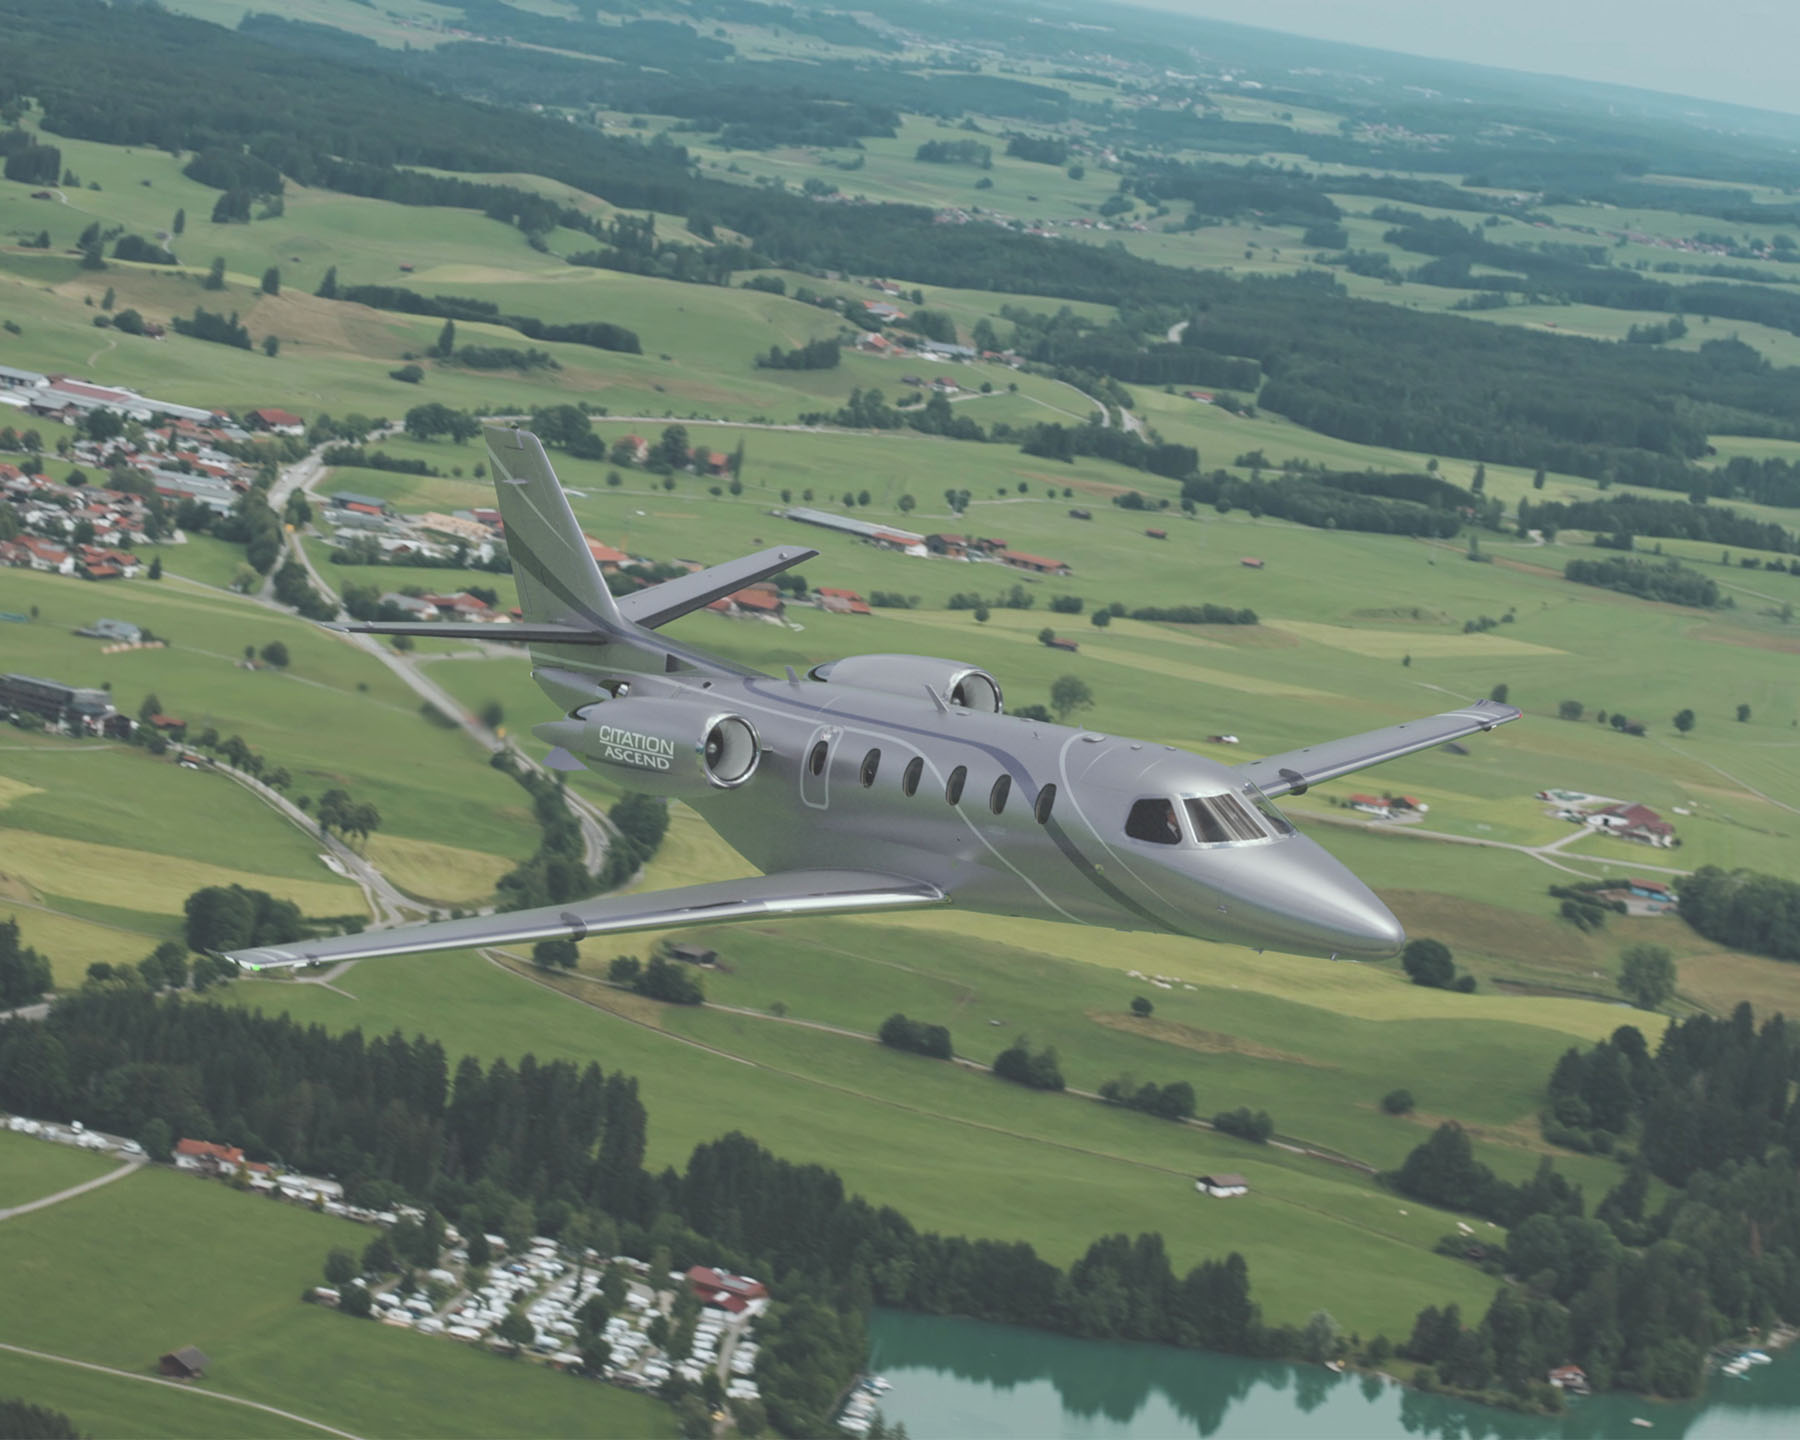 Citation Ascend flying over the European countryside.